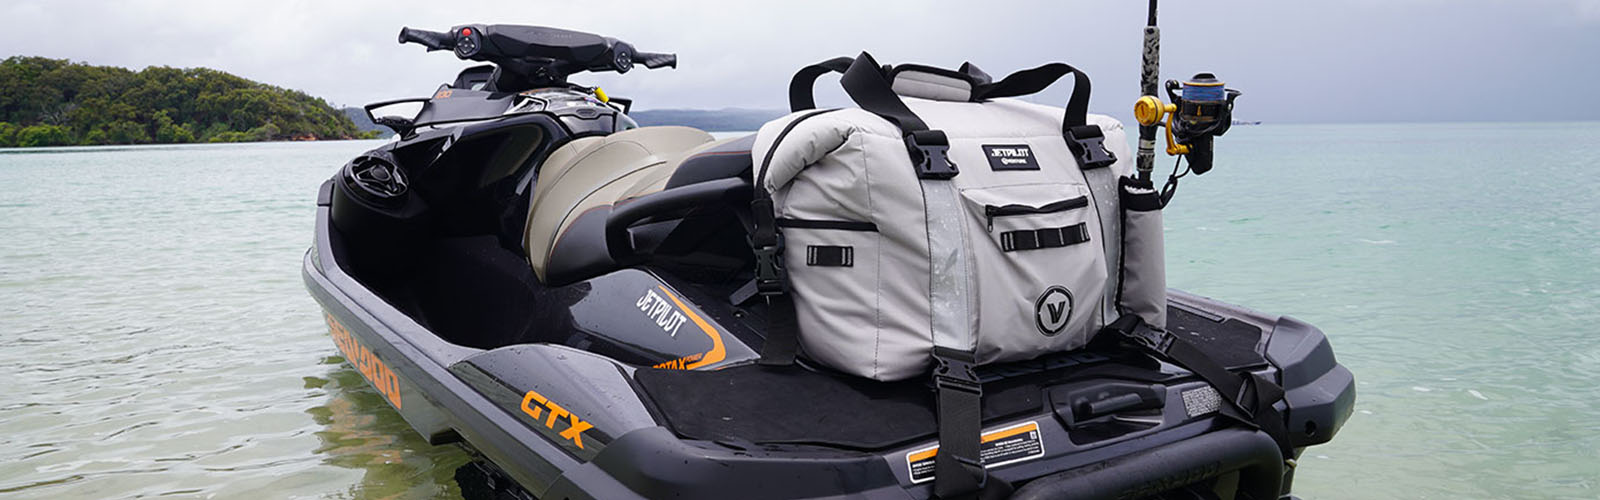 Jet Ski and Watersports Accessories